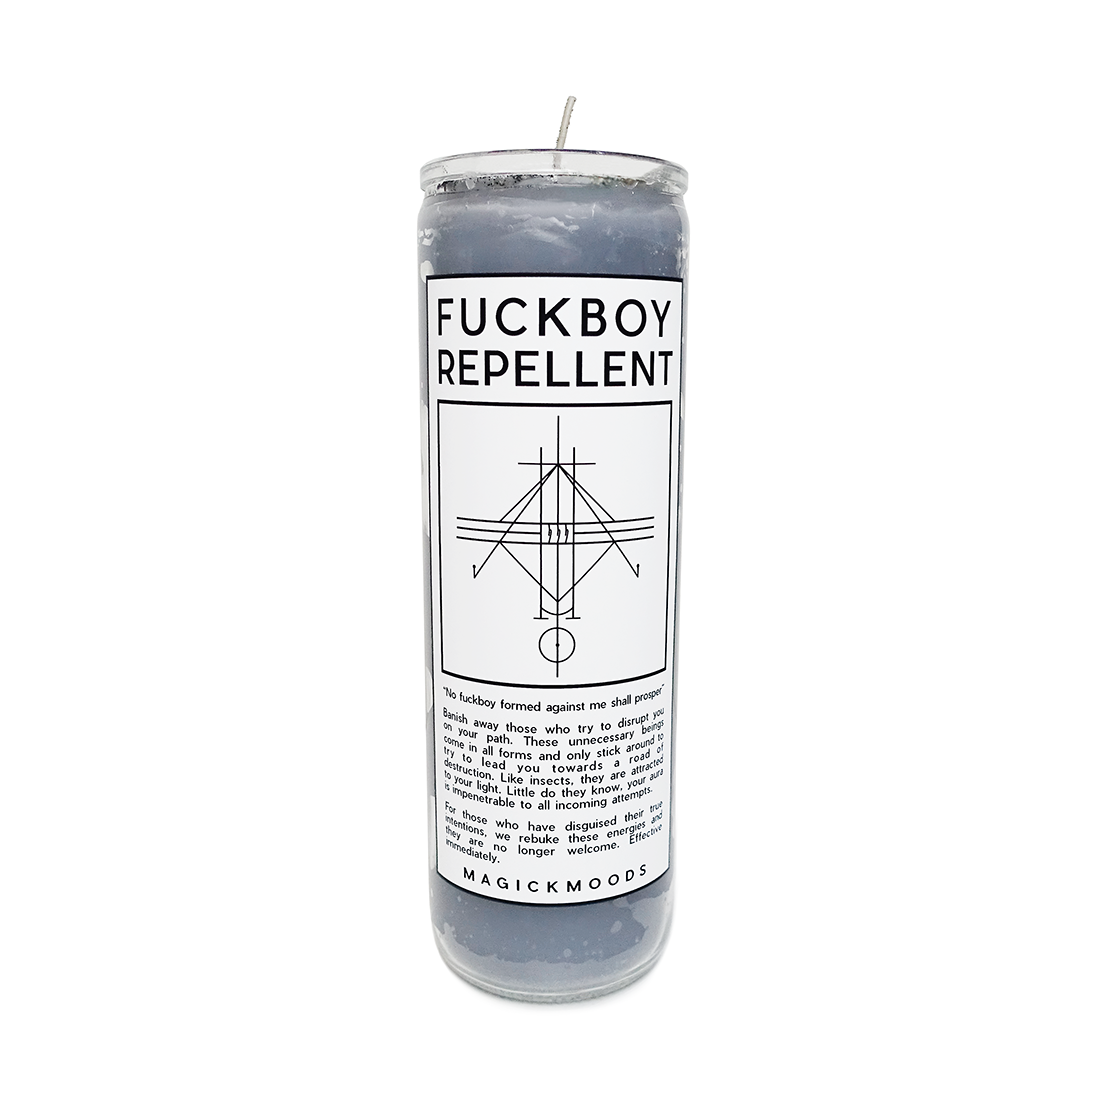 Fuckboy Repellent 7-Day Meditation Candle - PREORDER - Ships by Feb 26th, 2024